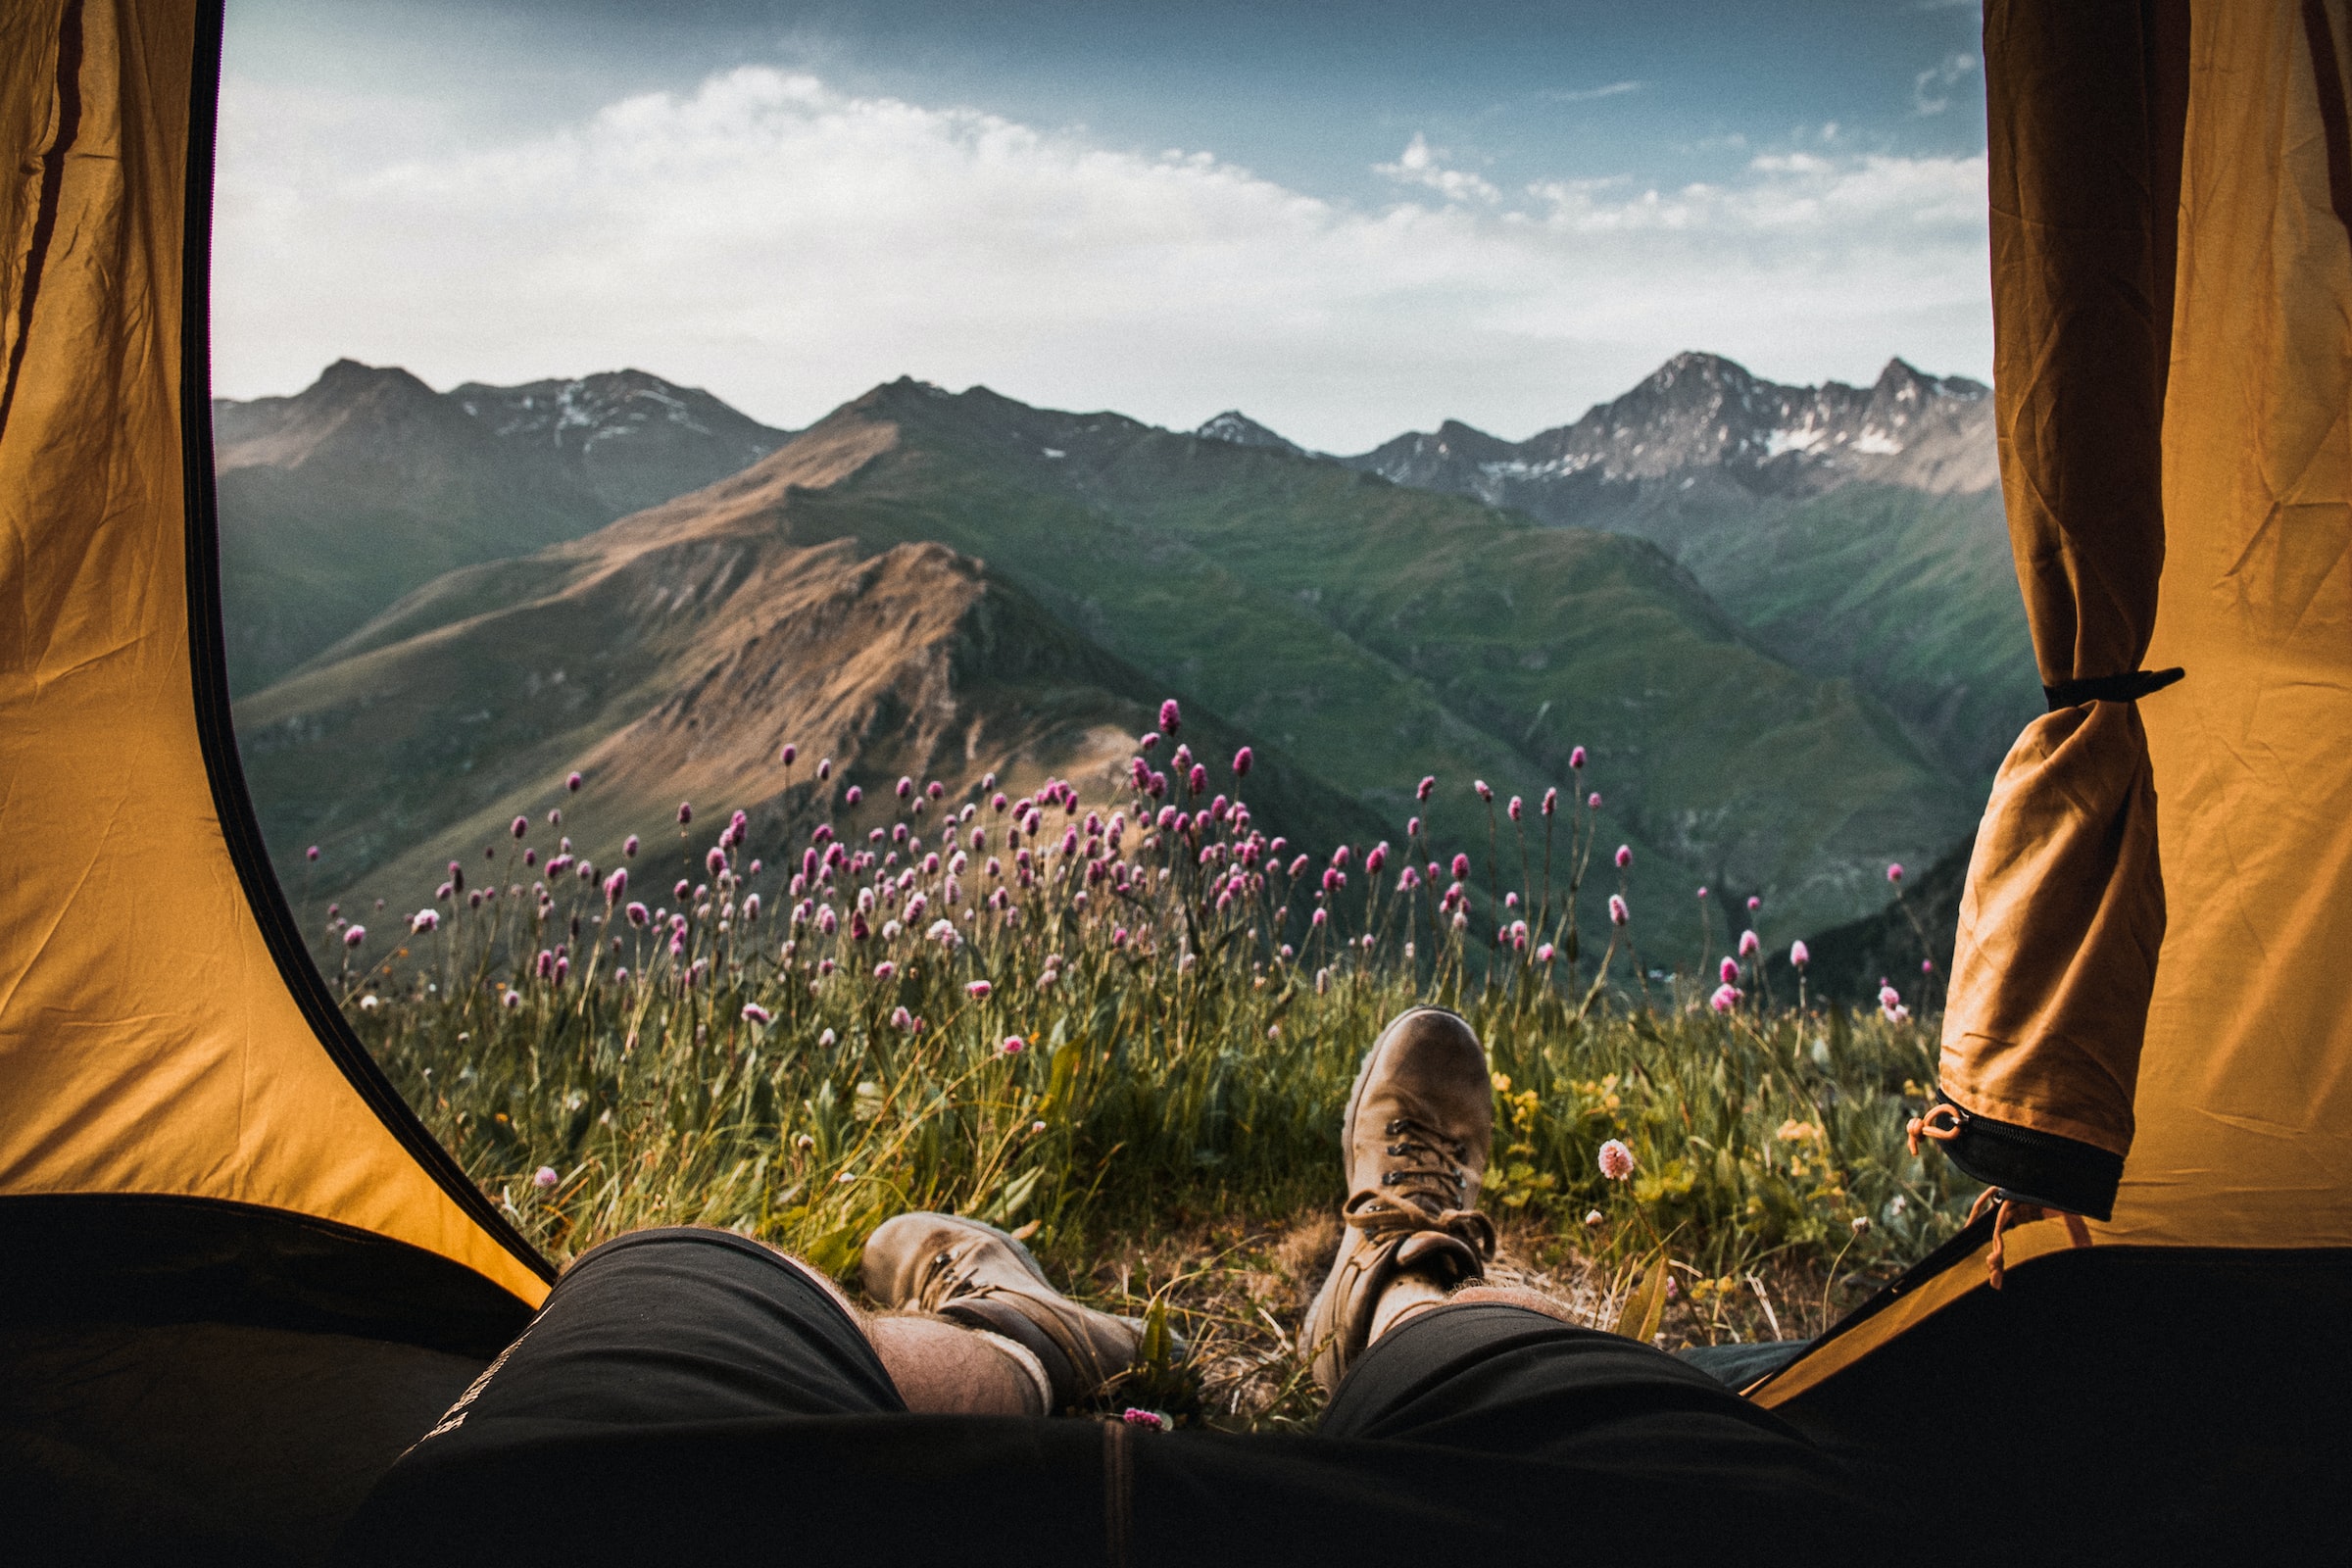 A pair of feet wearing hiking boots are propped up in front of a scenic mountain view